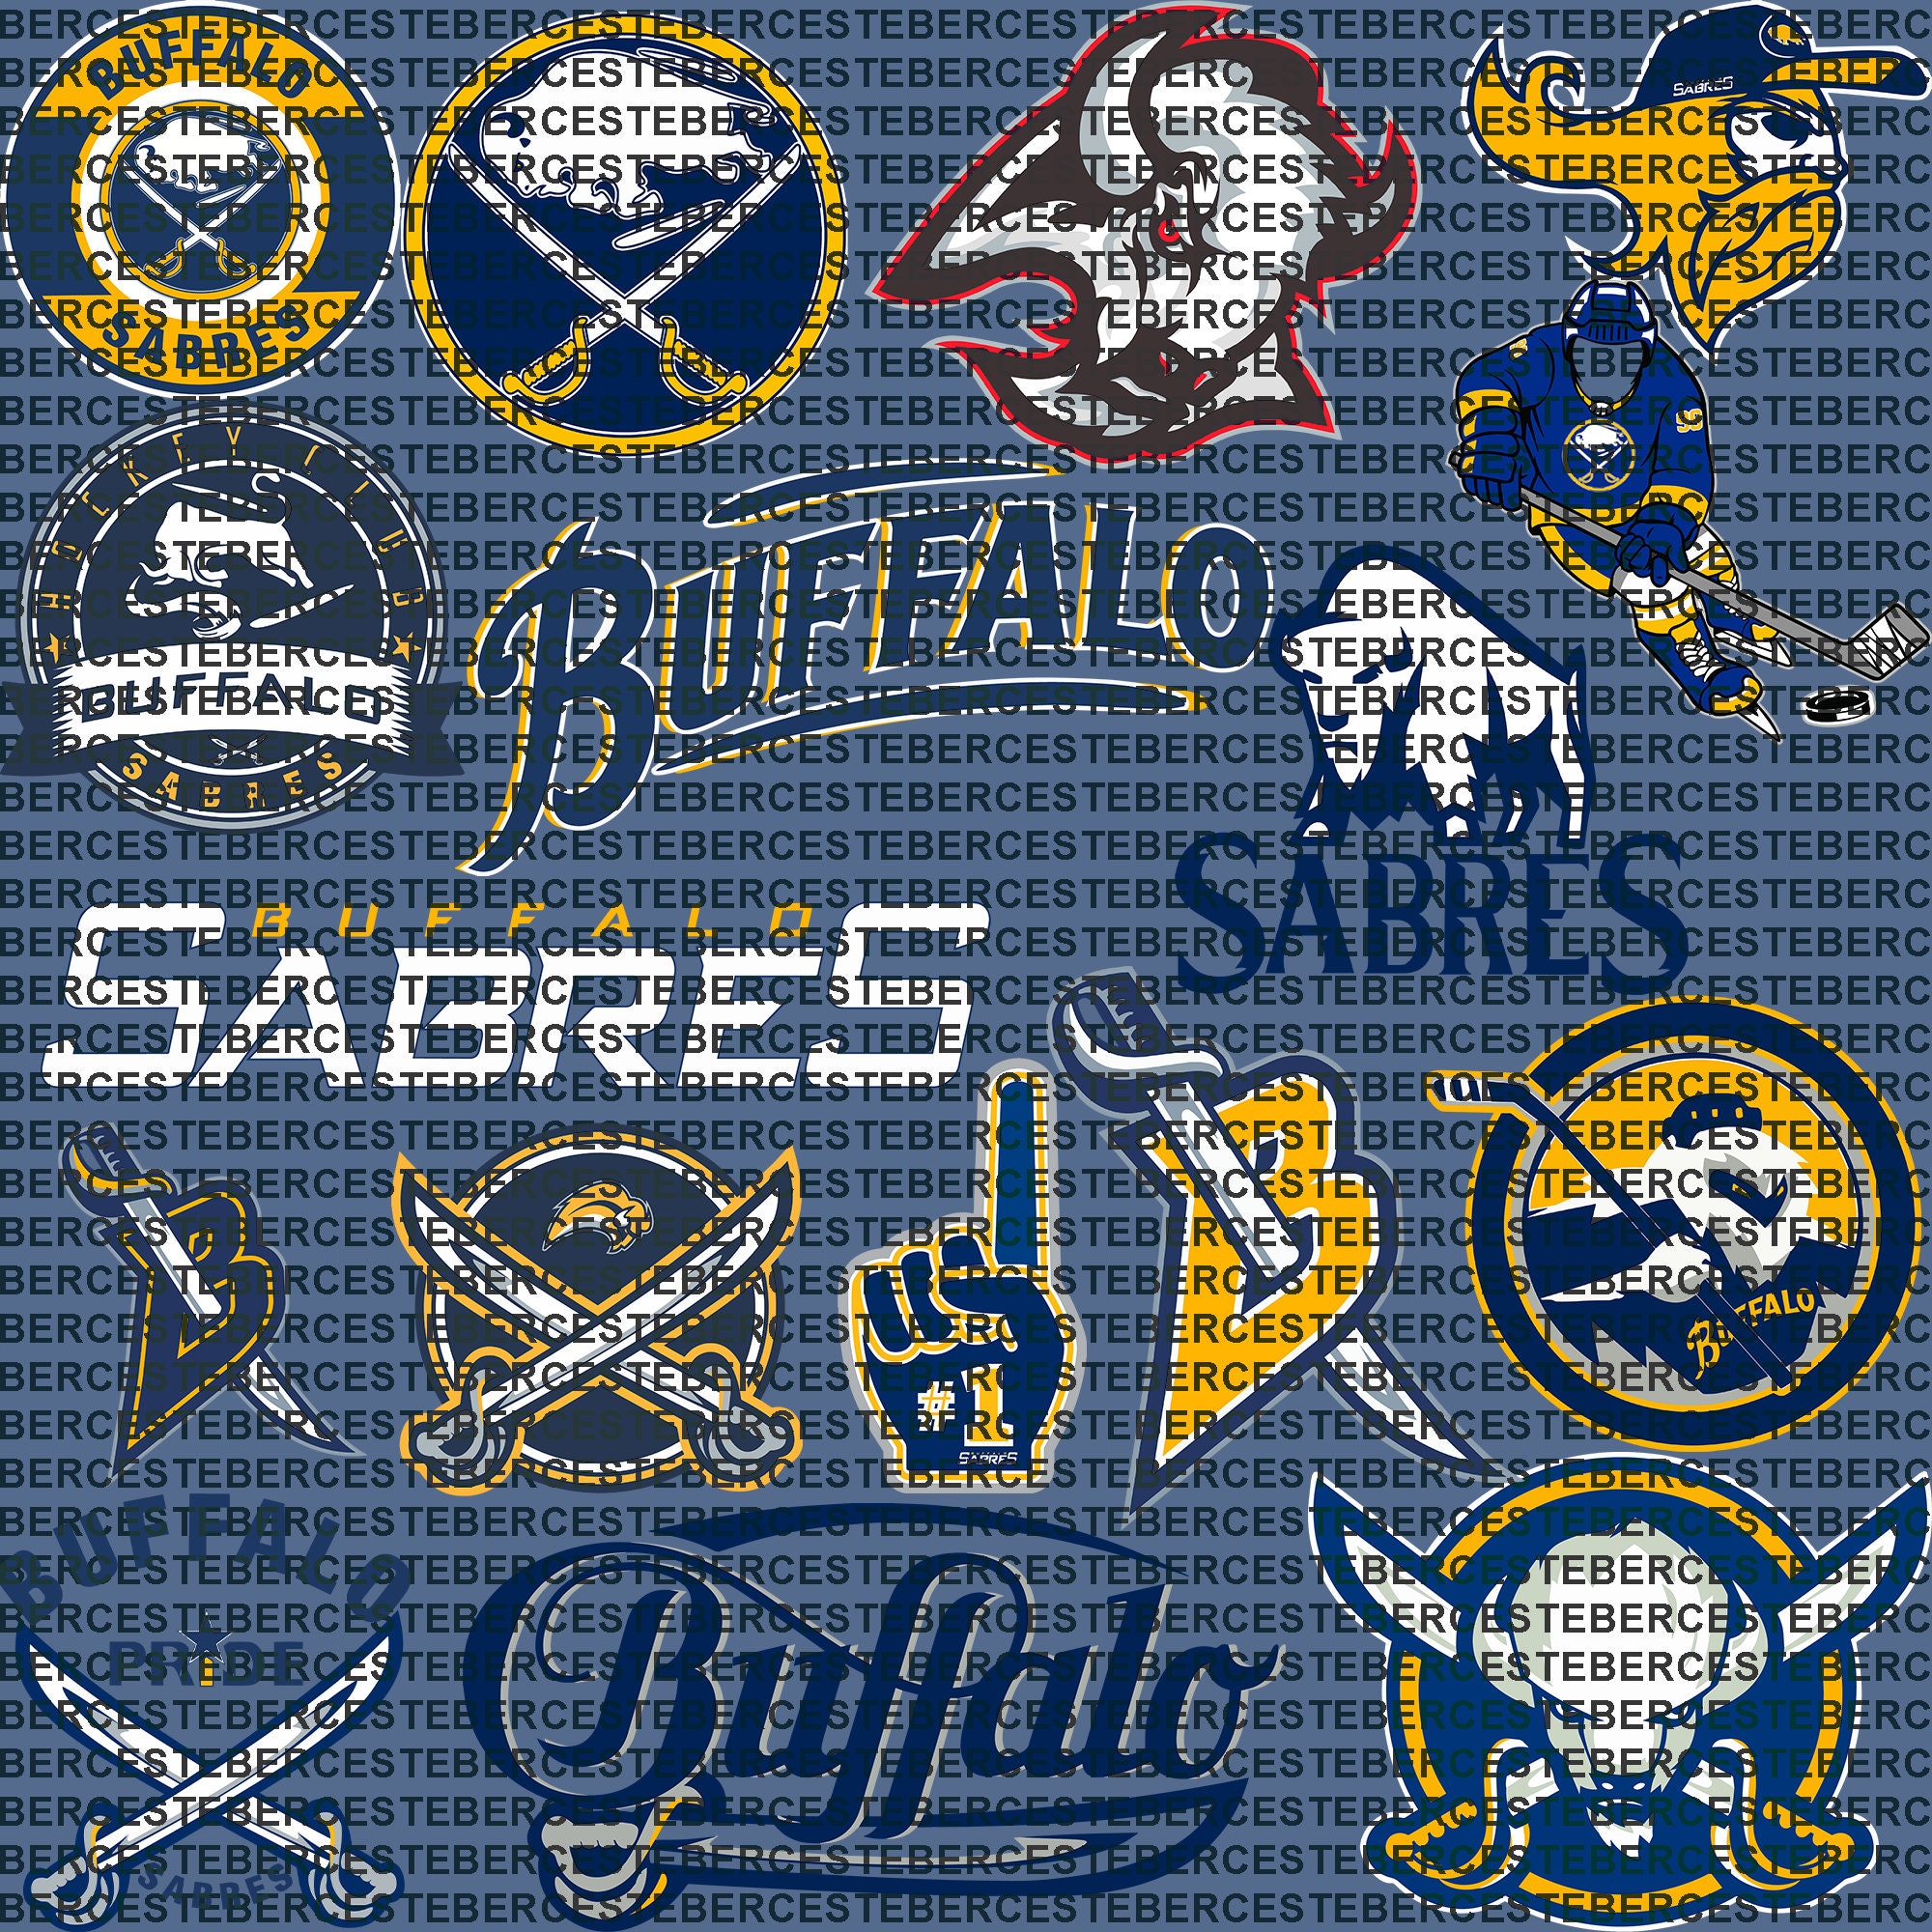 Buffalo Sabres Black & Red Goat Head Lawn Sign